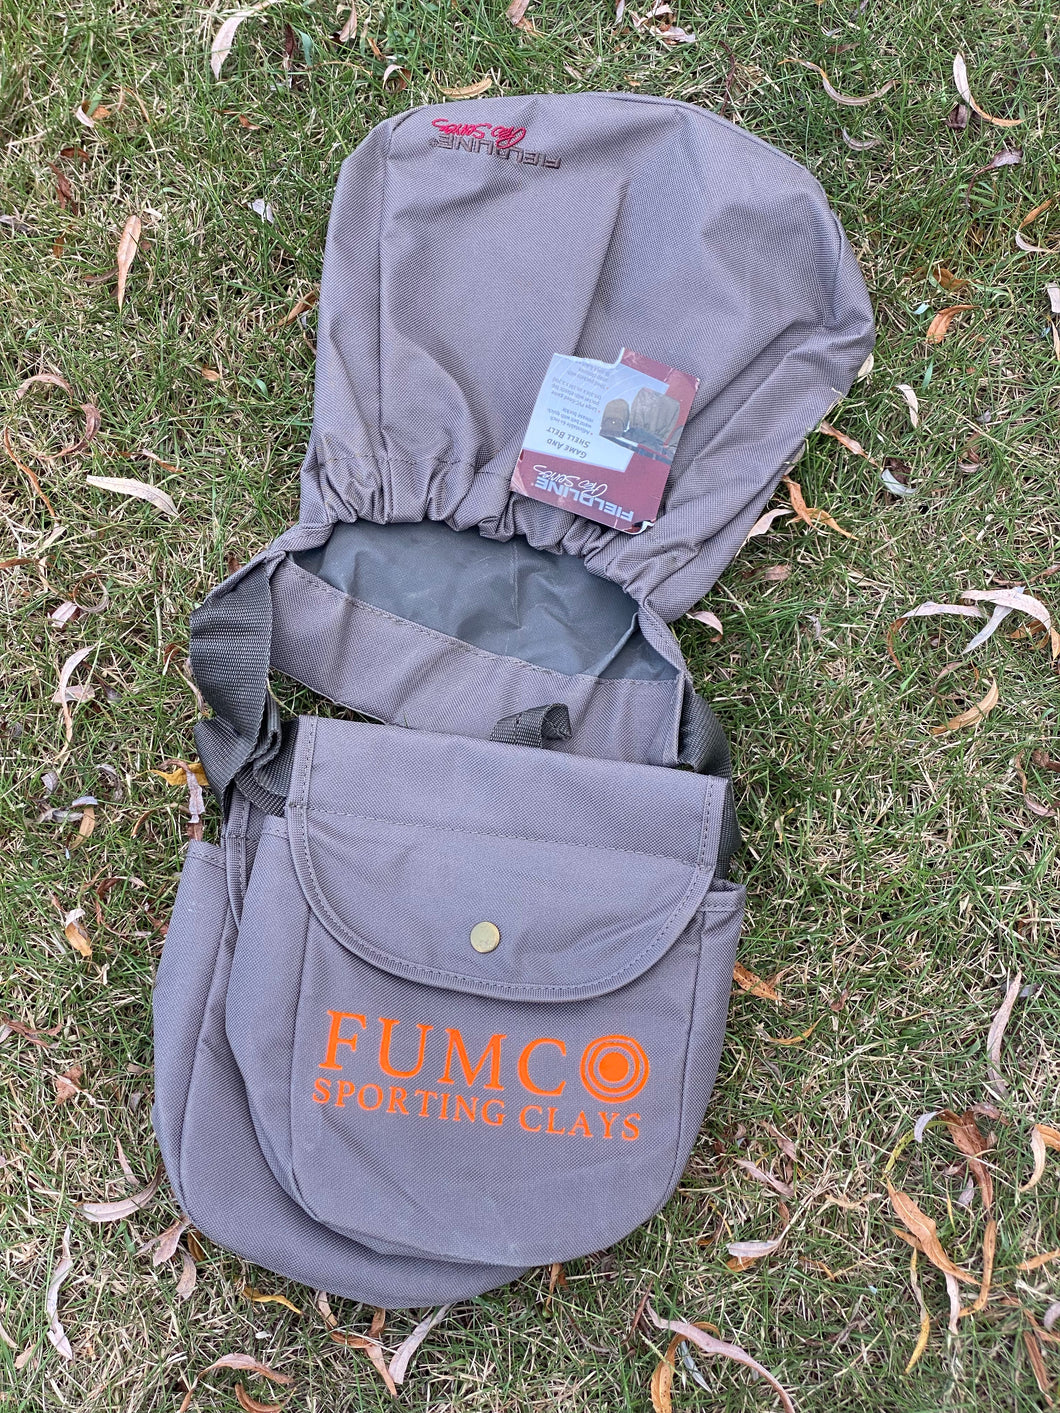 FUMCO Sporting Clays and Game Belt